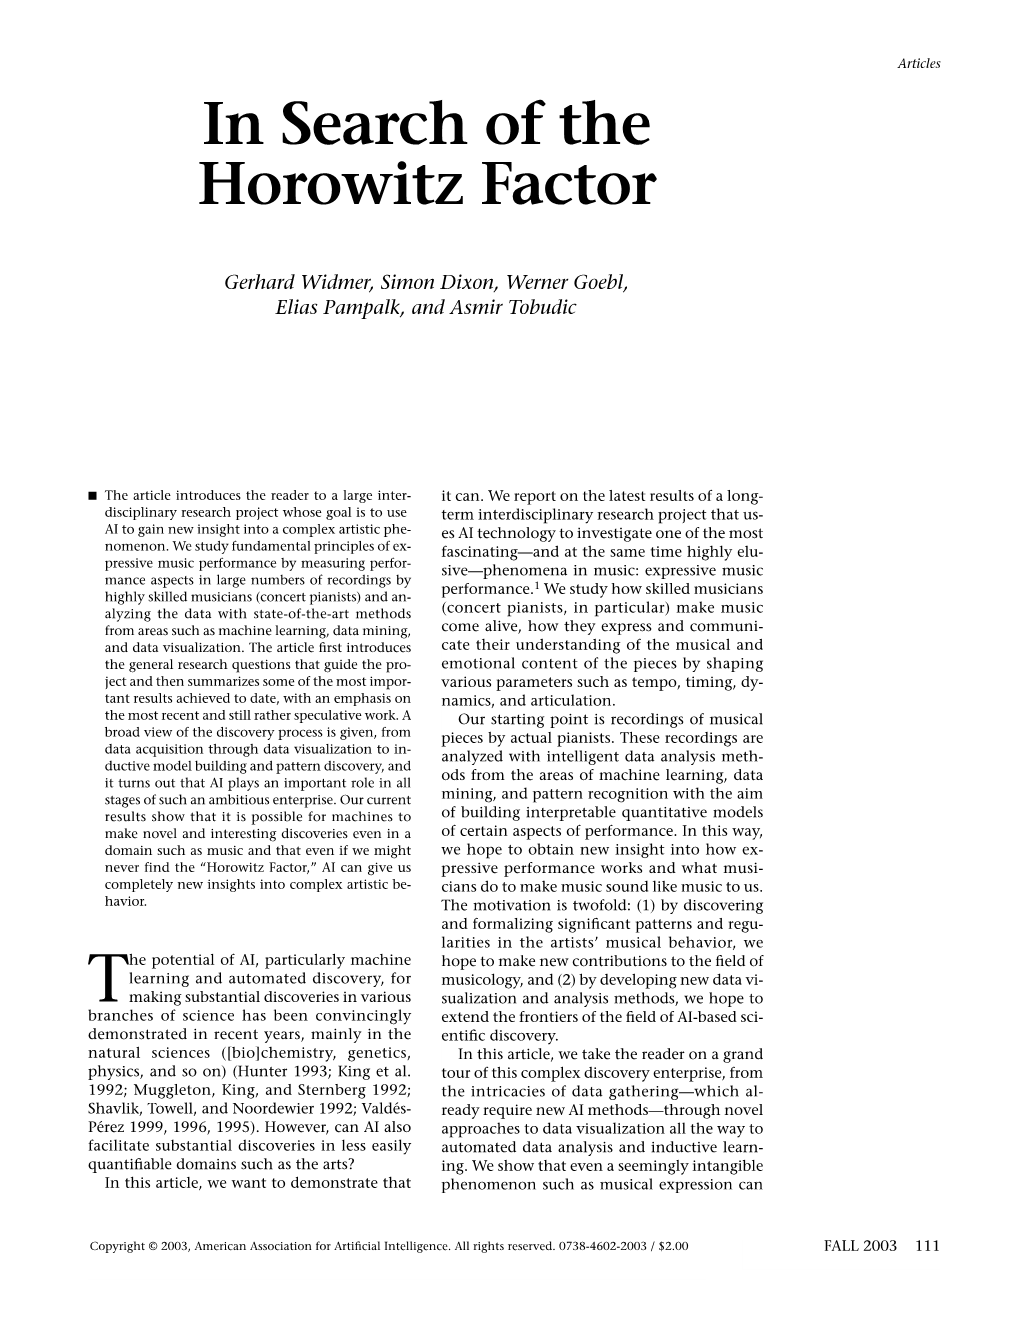 In Search of the Horowitz Factor